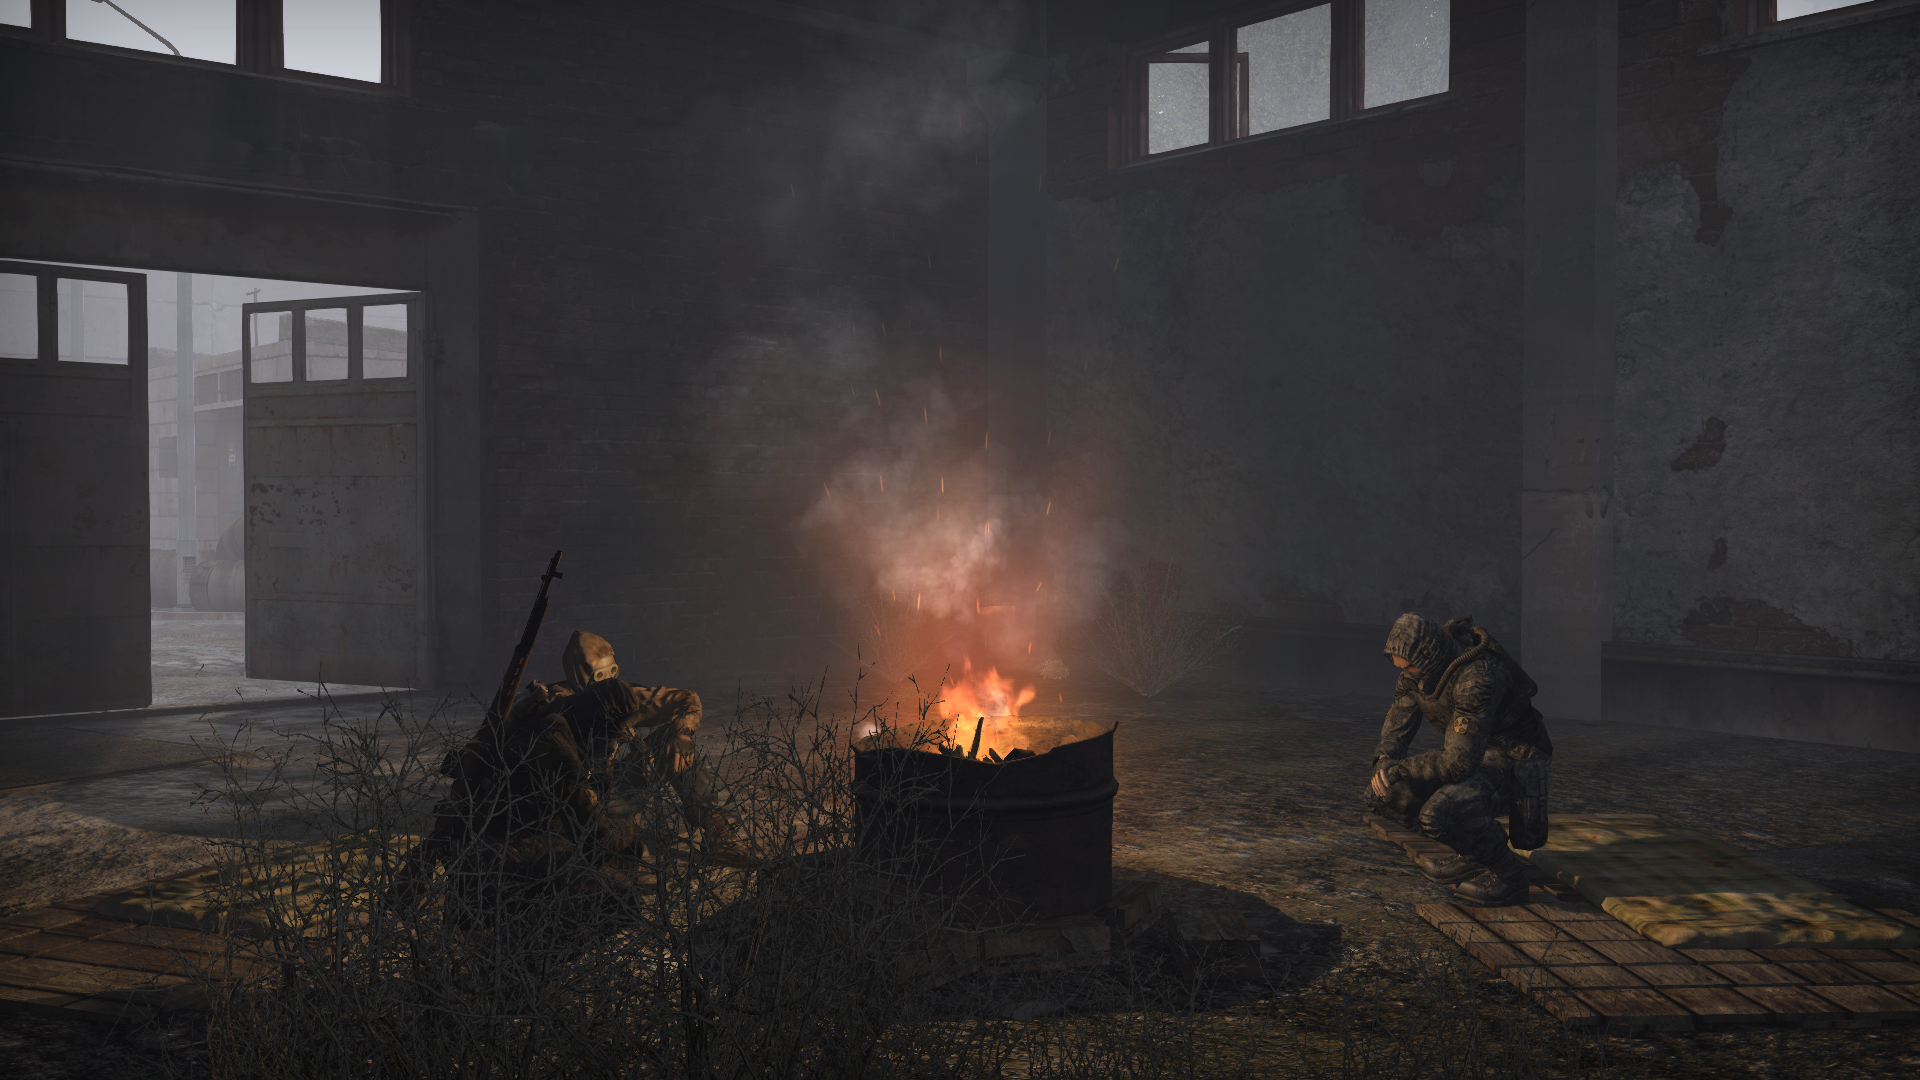 S.T.A.L.K.E.R. Anomaly mod for S.T.A.L.K.E.R.: Call of ... - 